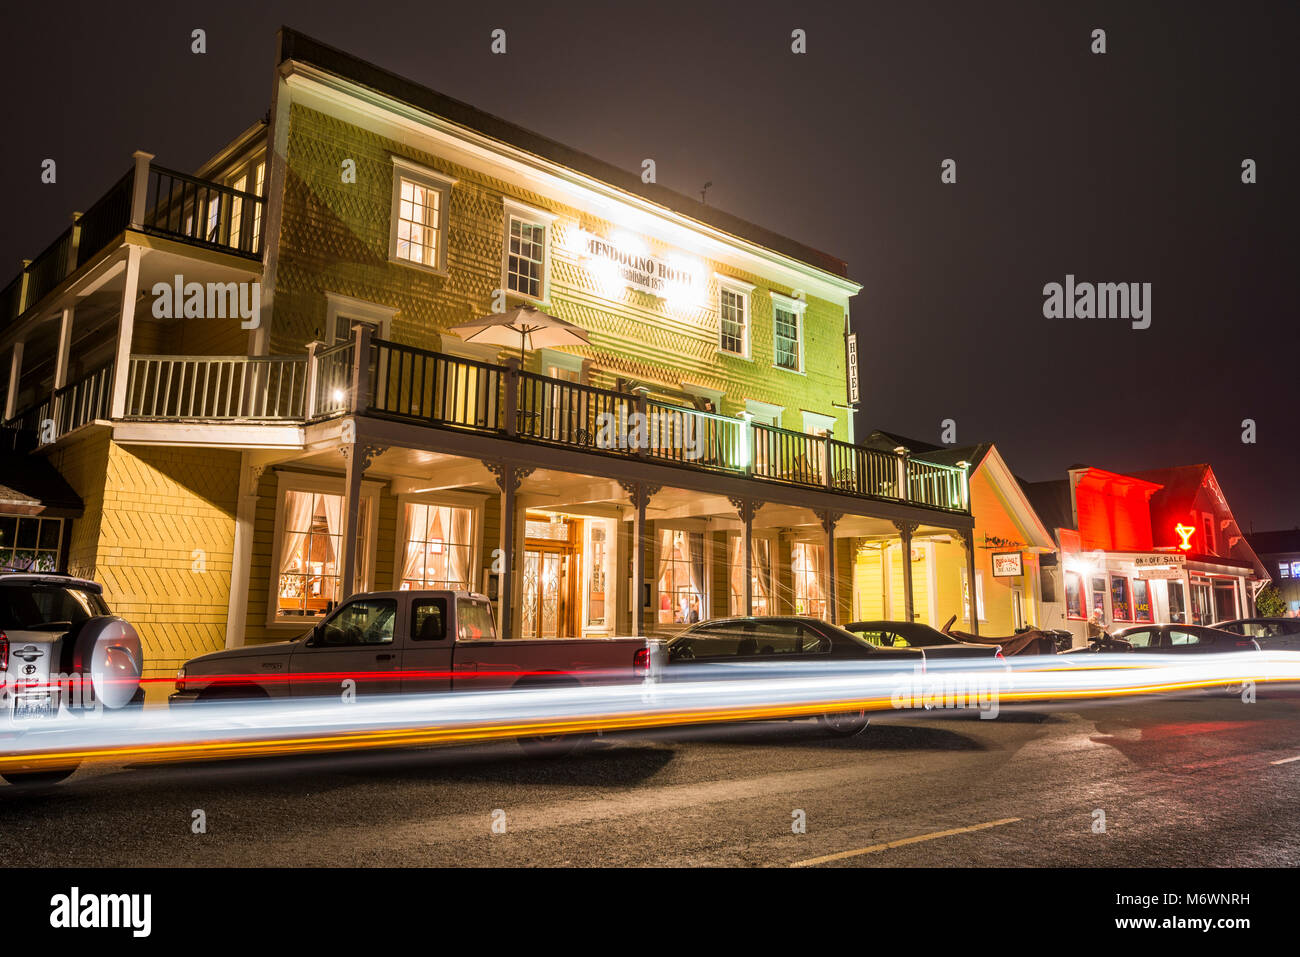 The Mendocino Hotel at night in the historic downtown area of Mendocino, California. Stock Photo